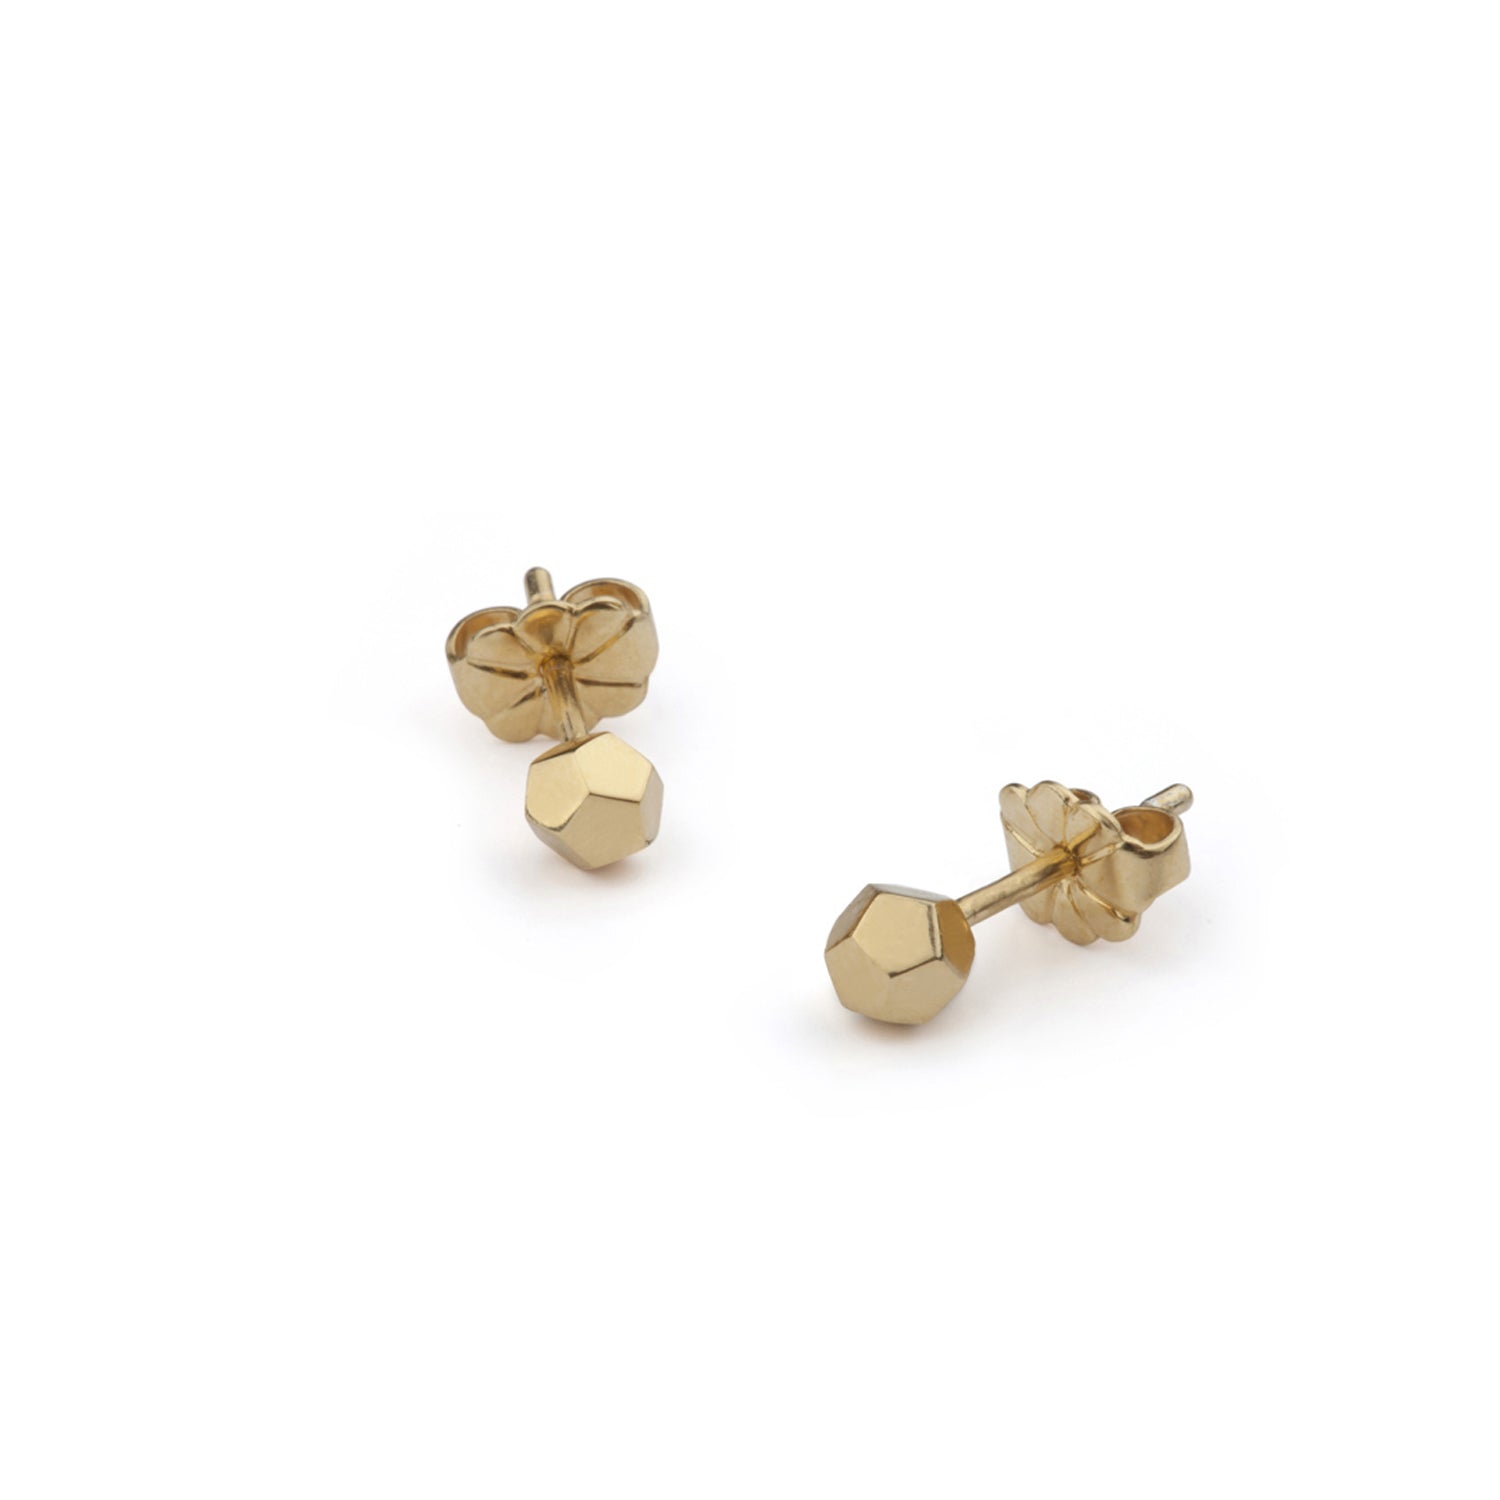 Dodecahedron Stud Earrings - 9k Yellow Gold - Myia Bonner Jewellery